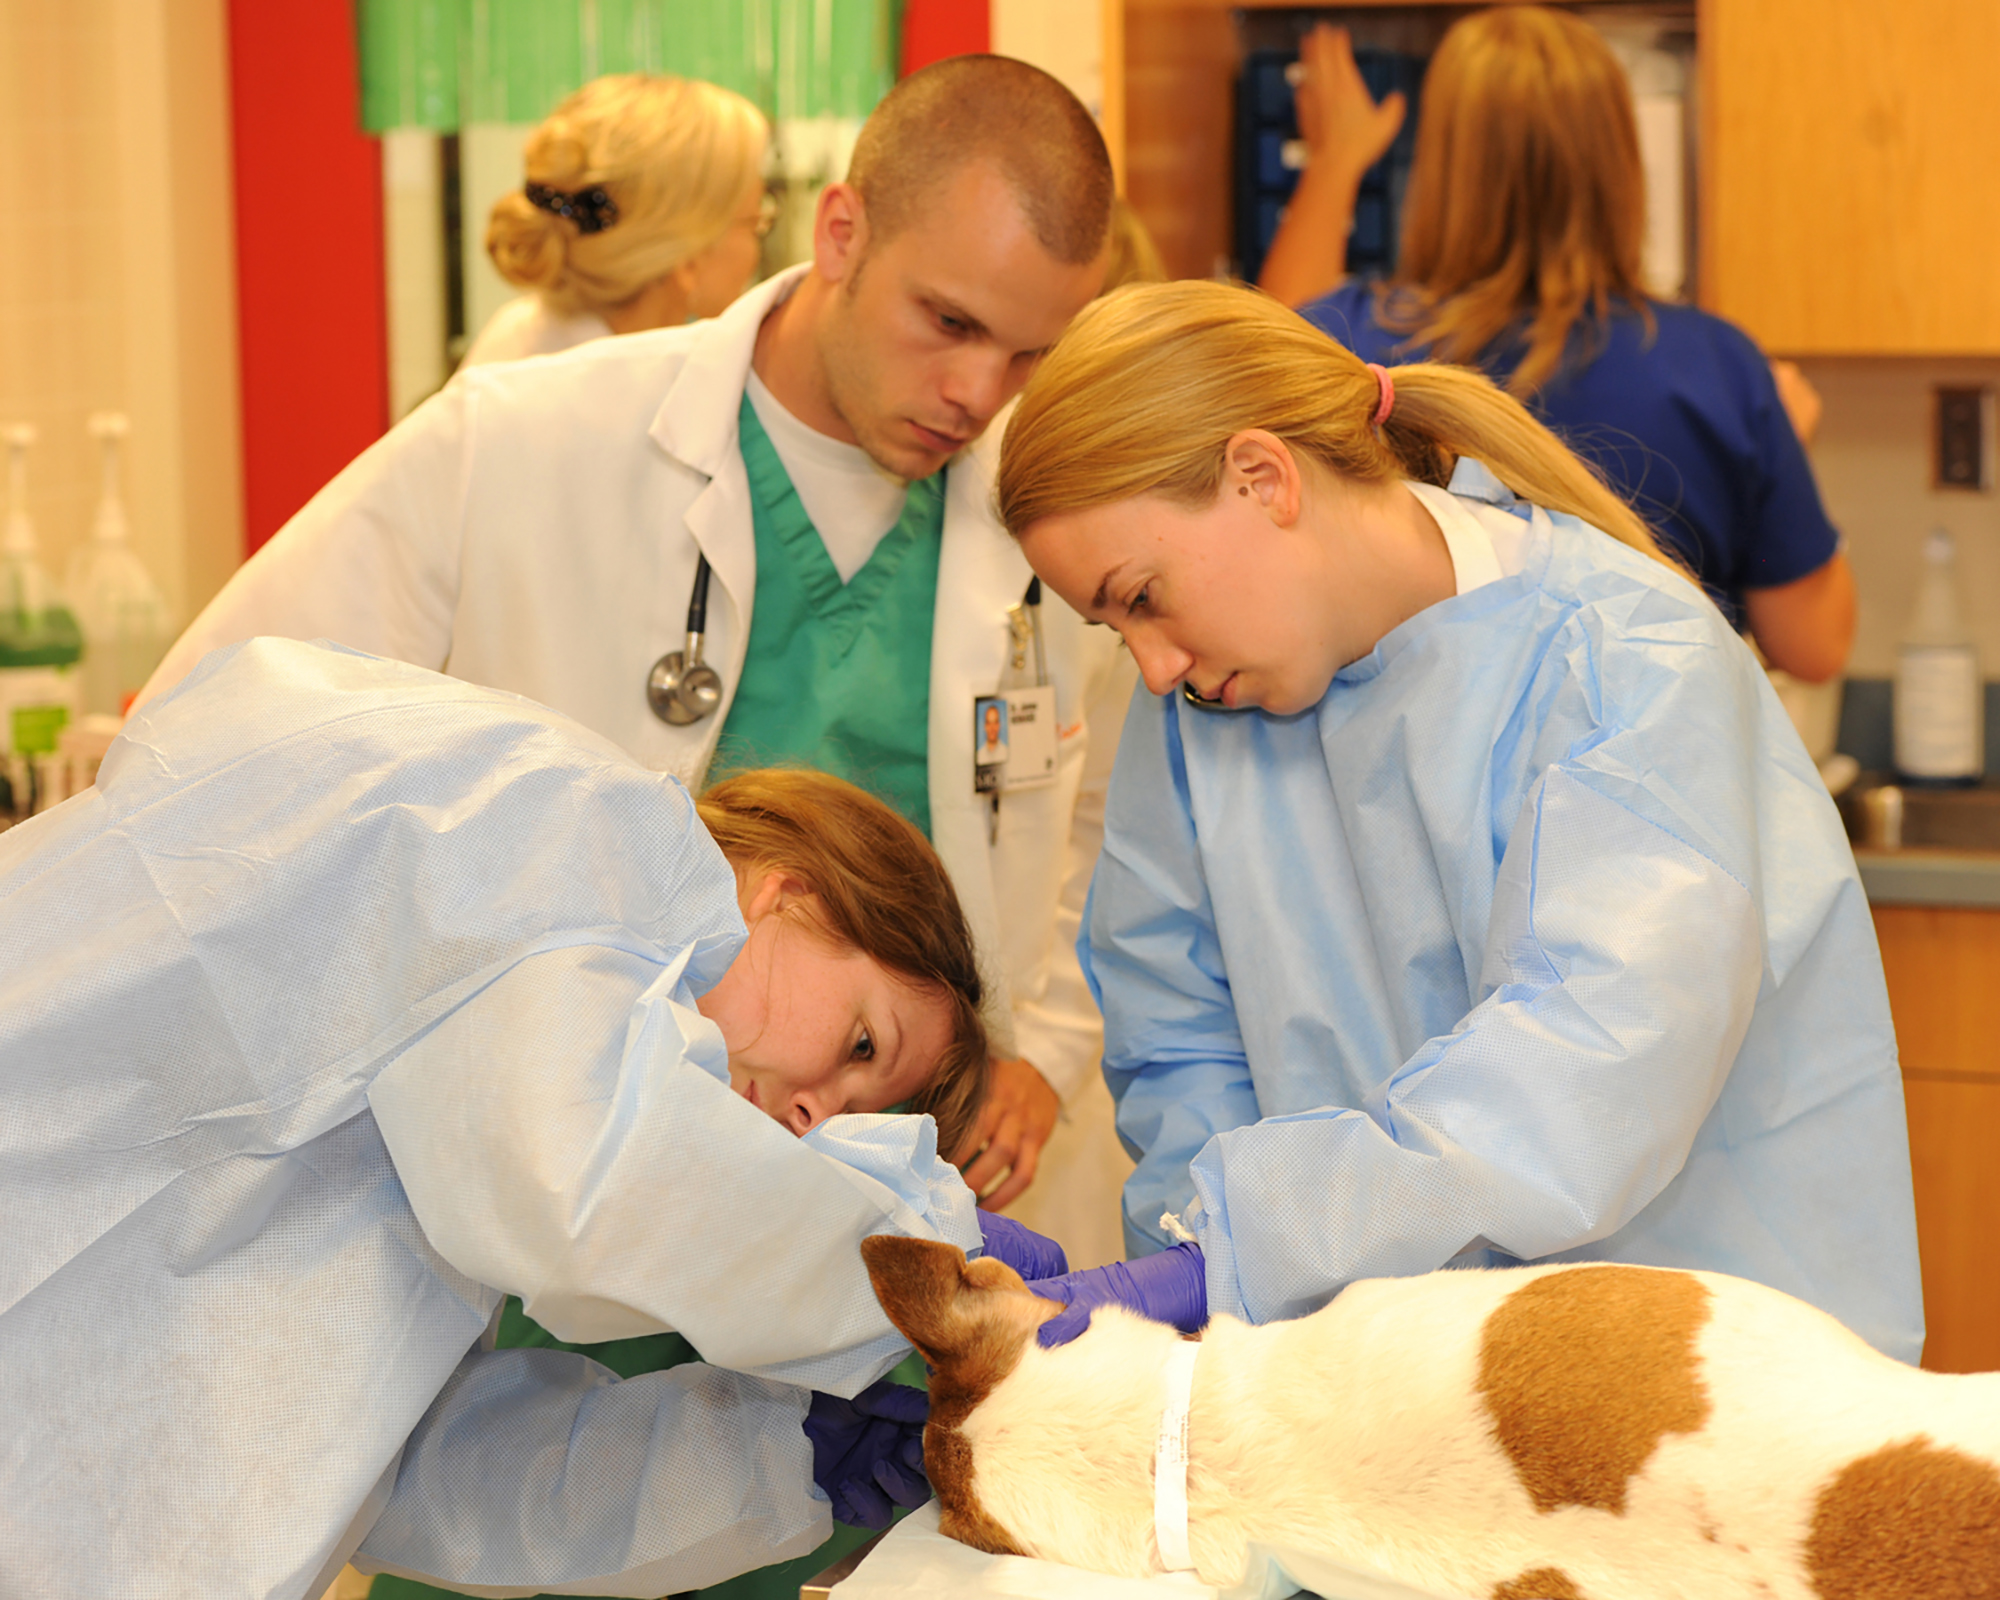 Veterinarians provide treatment to a small dog